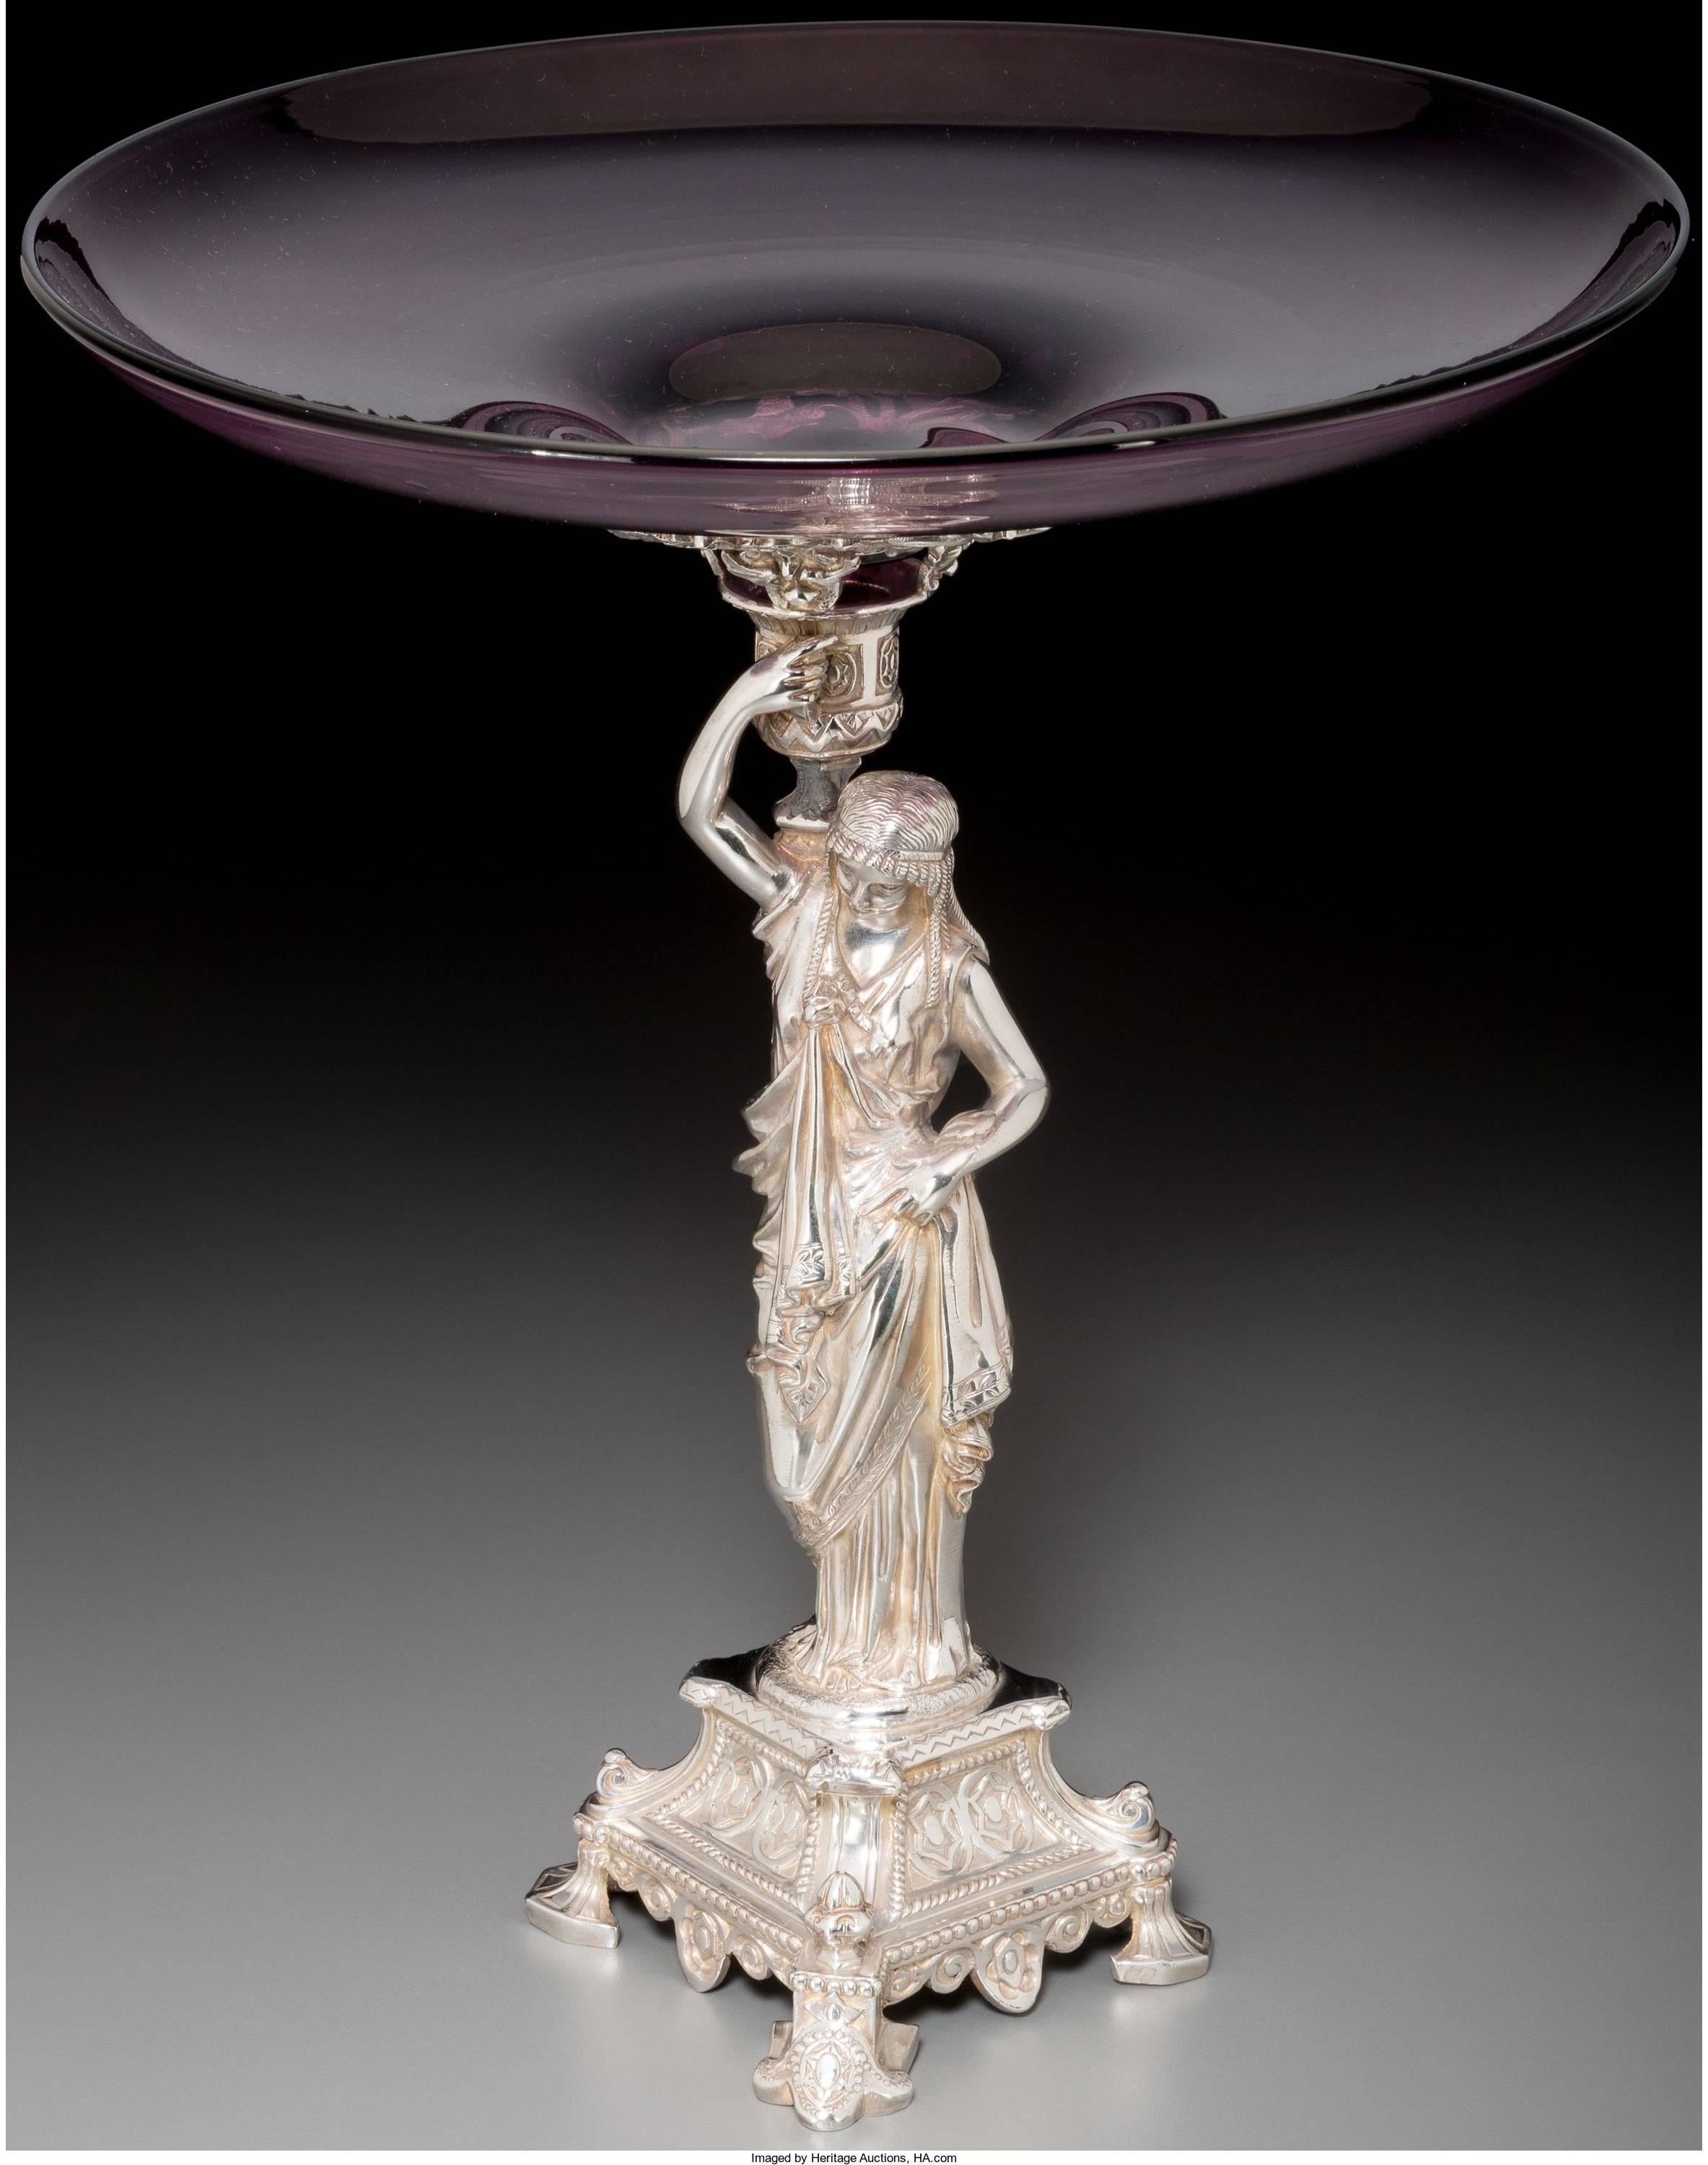 Decorate a table or buffet with this sophisticated silver plated center bowl. Crafted in England circa 1870, the antique centerpiece features a woman figure in Roman attire standing on a podium and holding a wide, shallow glass bowl. The Classic